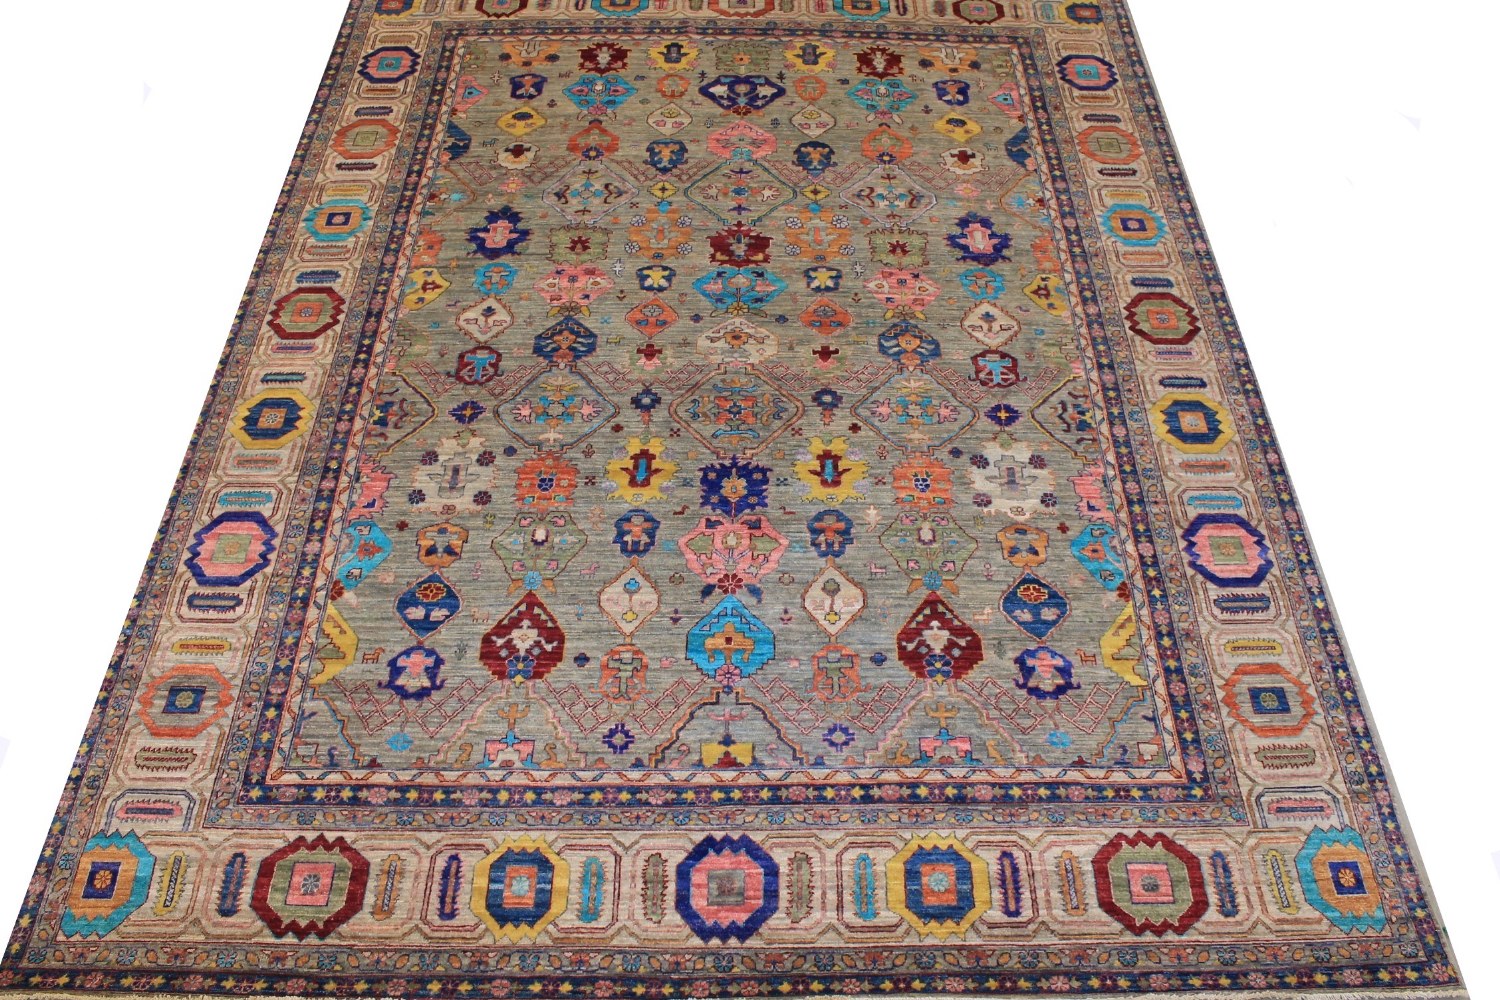 9x12 Aryana & Antique Revivals Hand Knotted Wool Area Rug - MR025885